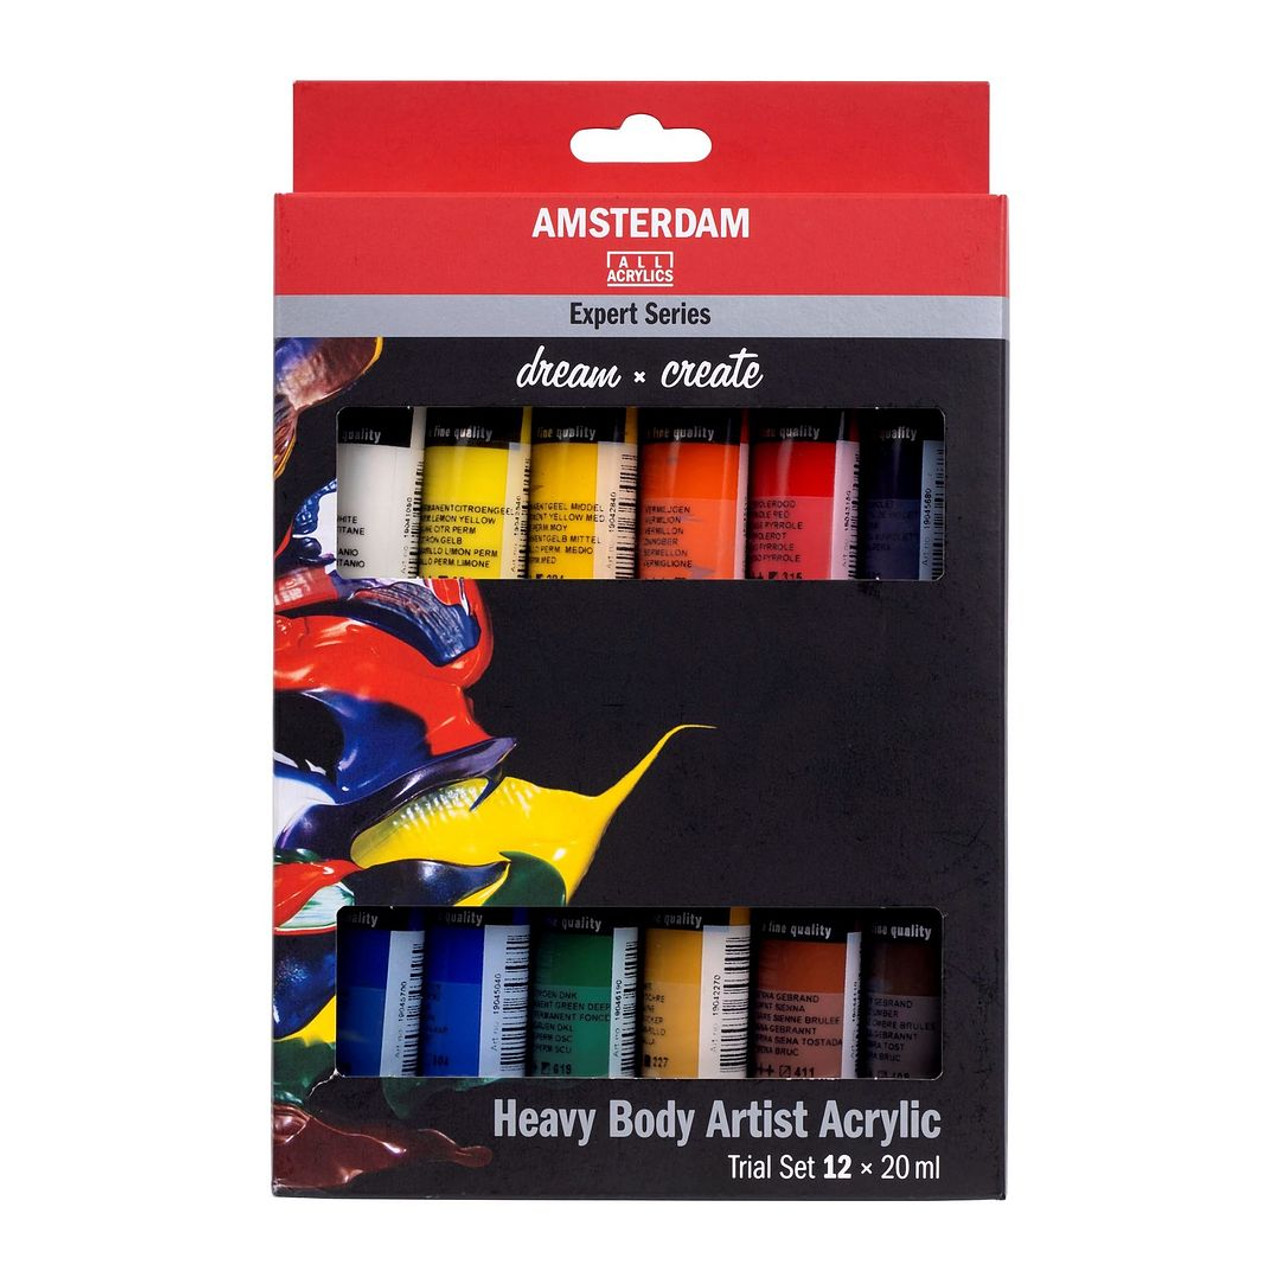 Amsterdam Expert Cardboard set, containing 12 tubes of 20 ml